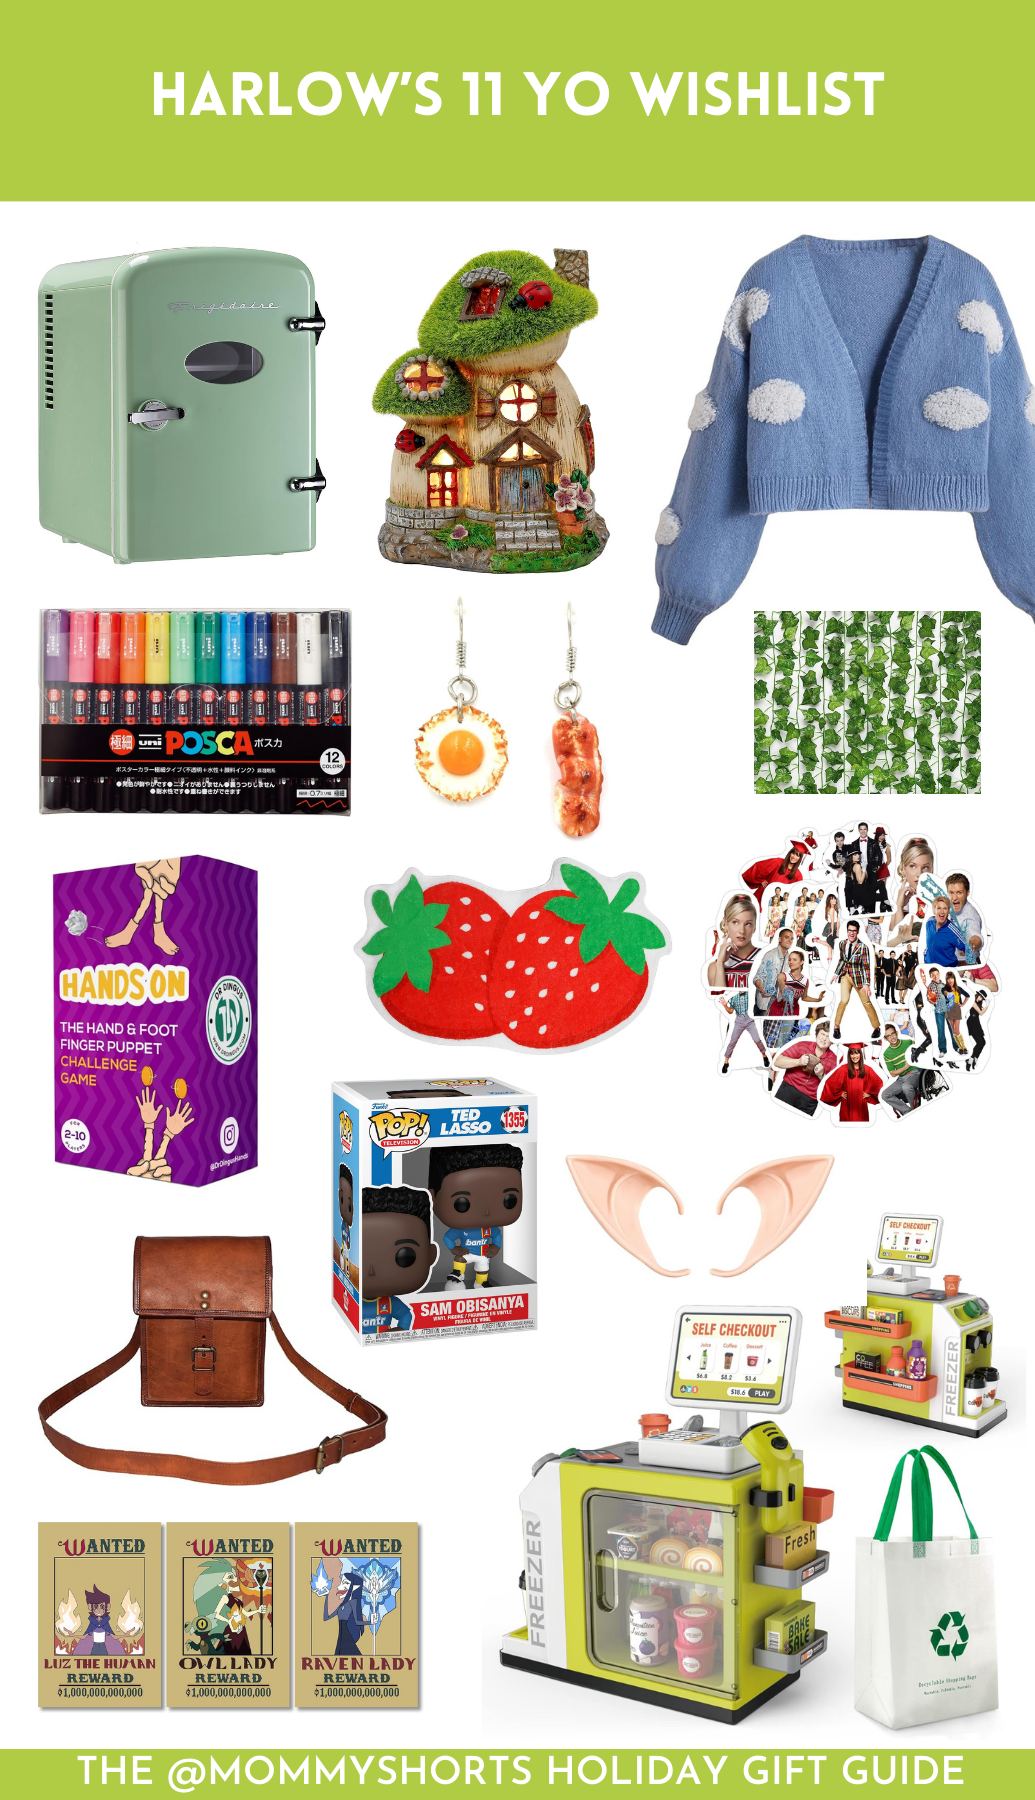 The Biggest, Best Holiday Gift Guide for Absolutely Everyone On Your List  in 2023!